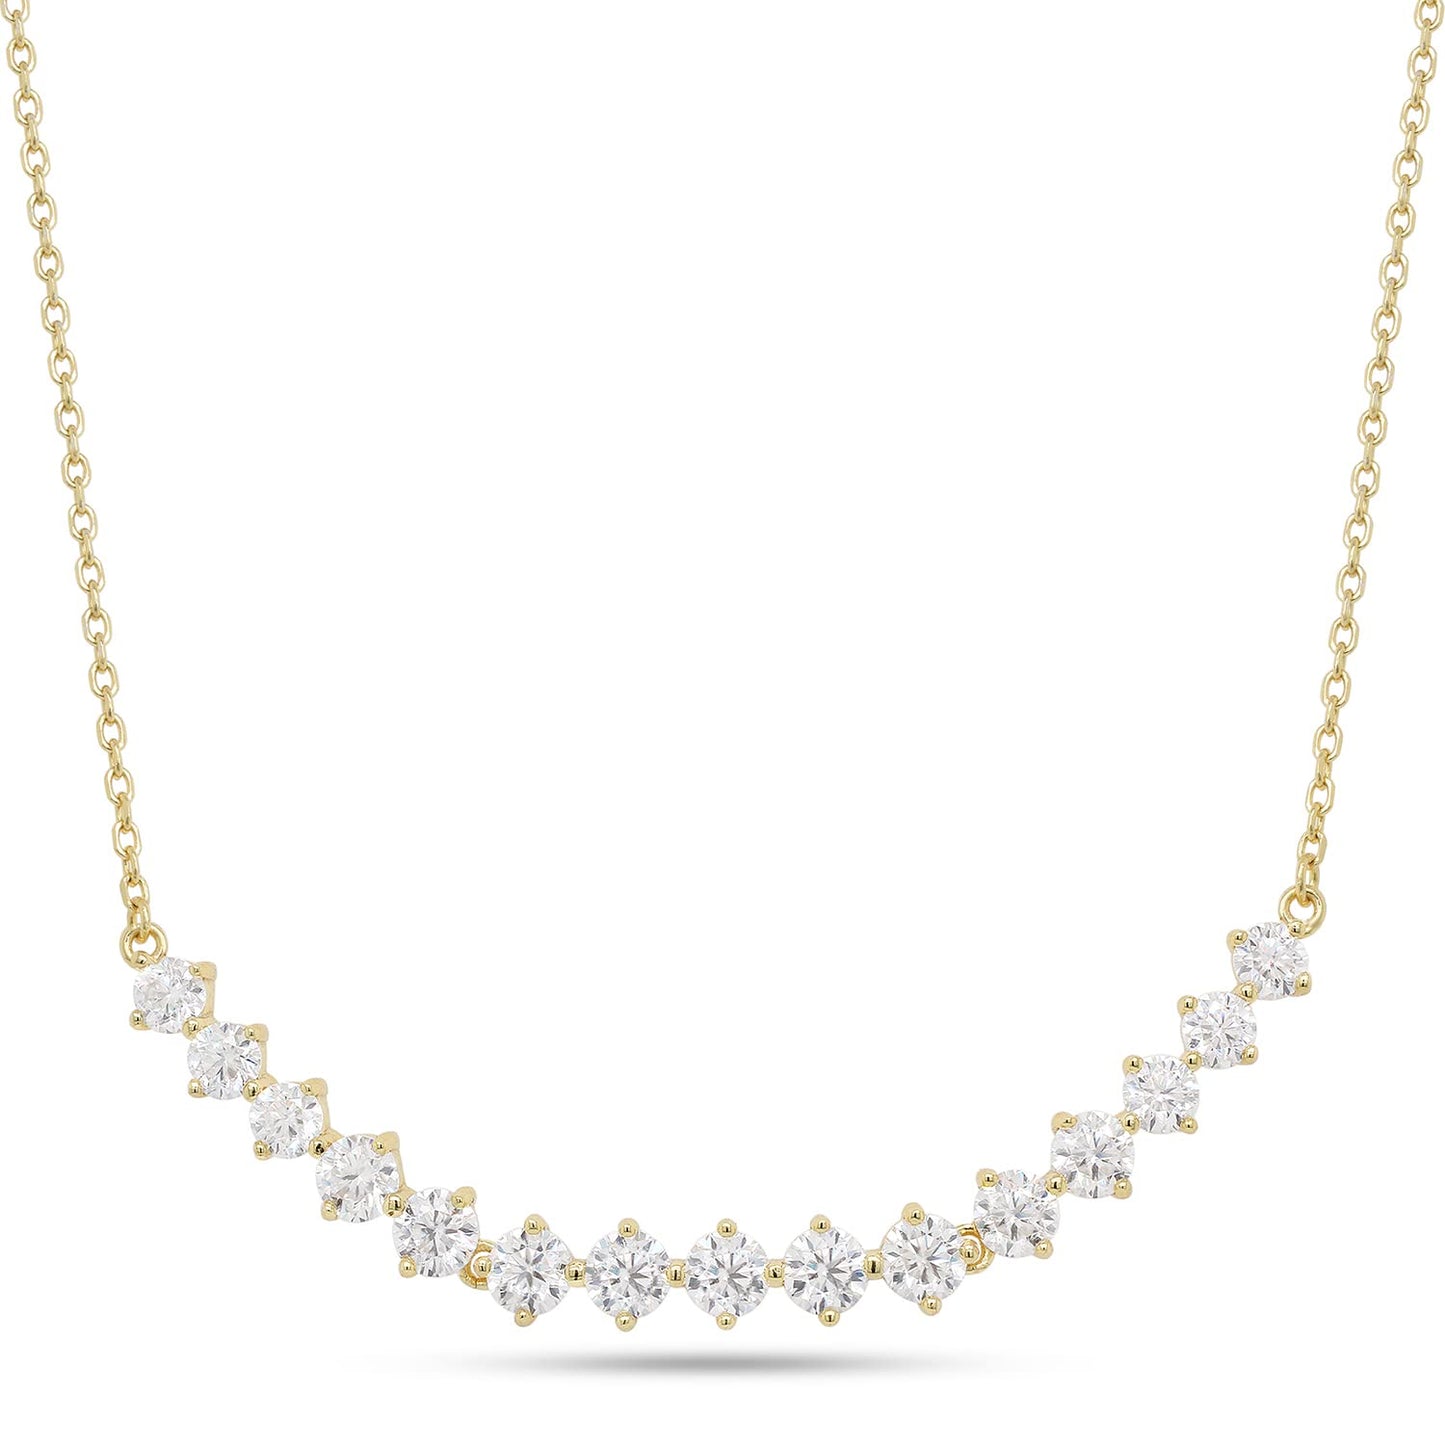 3.5MM & 4MM Round Cut Lab Created Moissanite Diamond Bib Necklace In 925 Sterling Silver